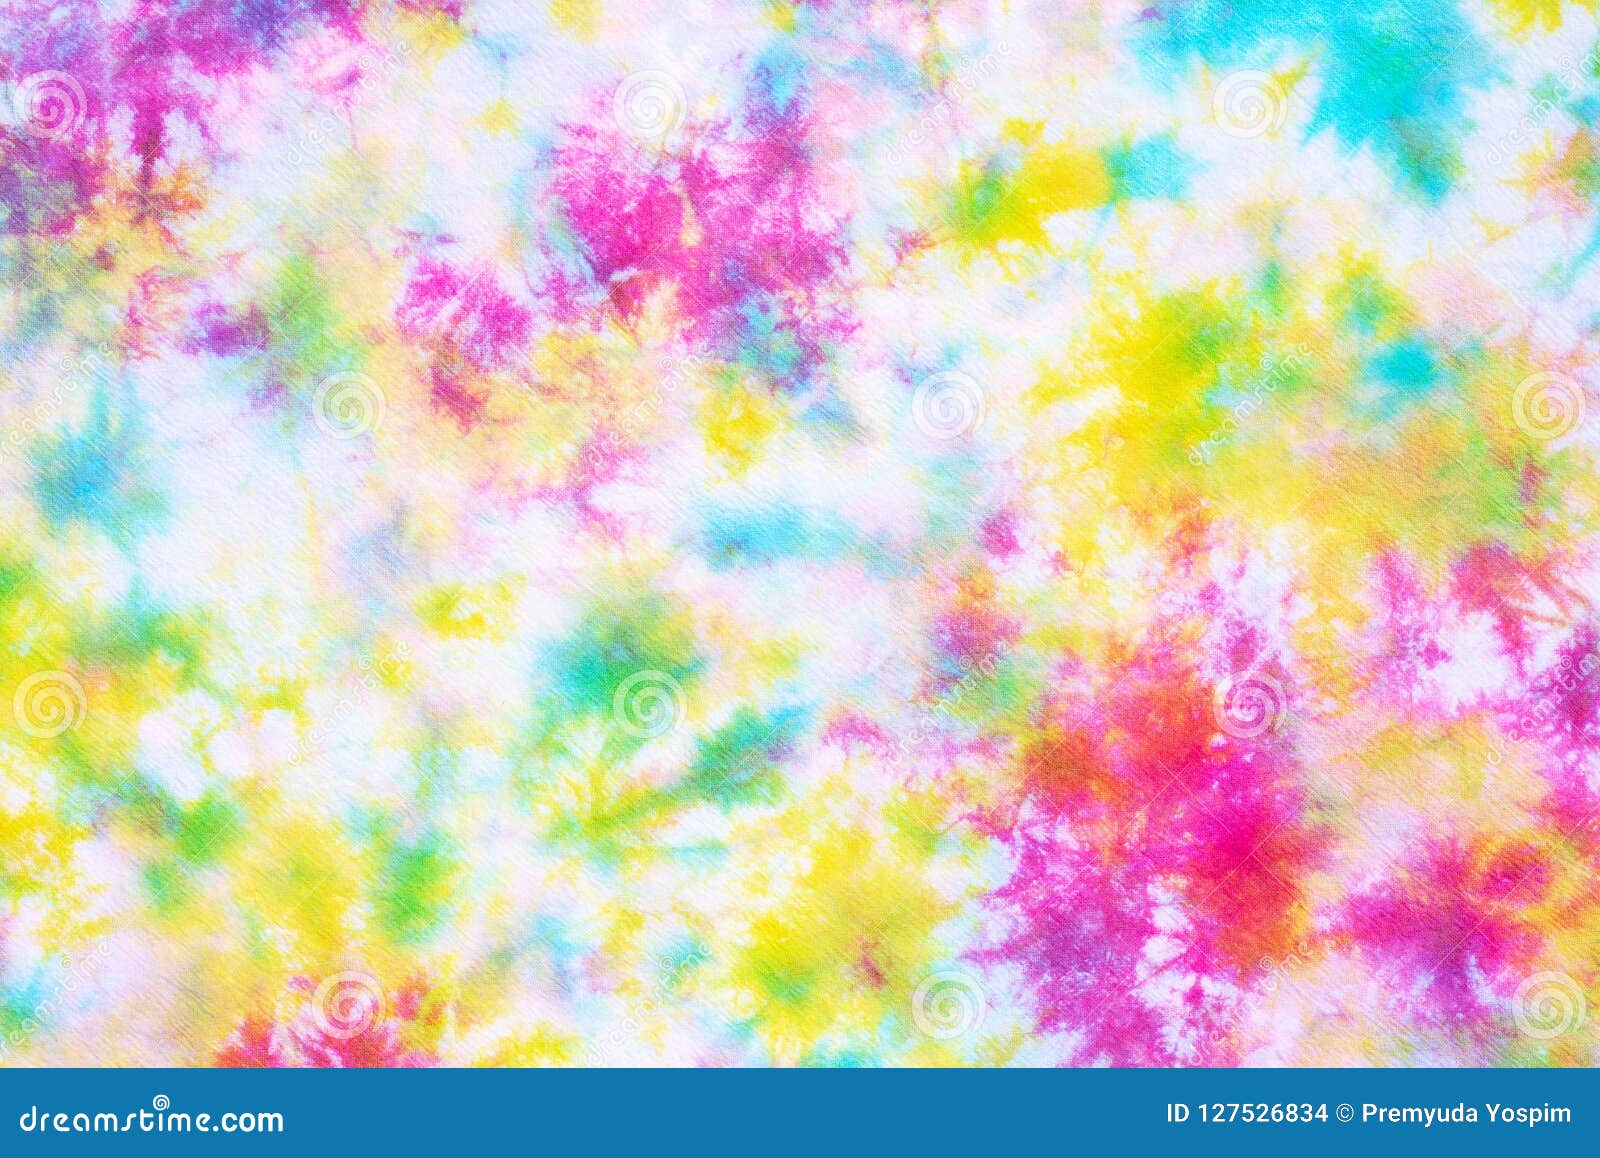 Colorful Tie Dye Pattern Abstract Background. Stock Photo - Image of cloth,  design: 127526834